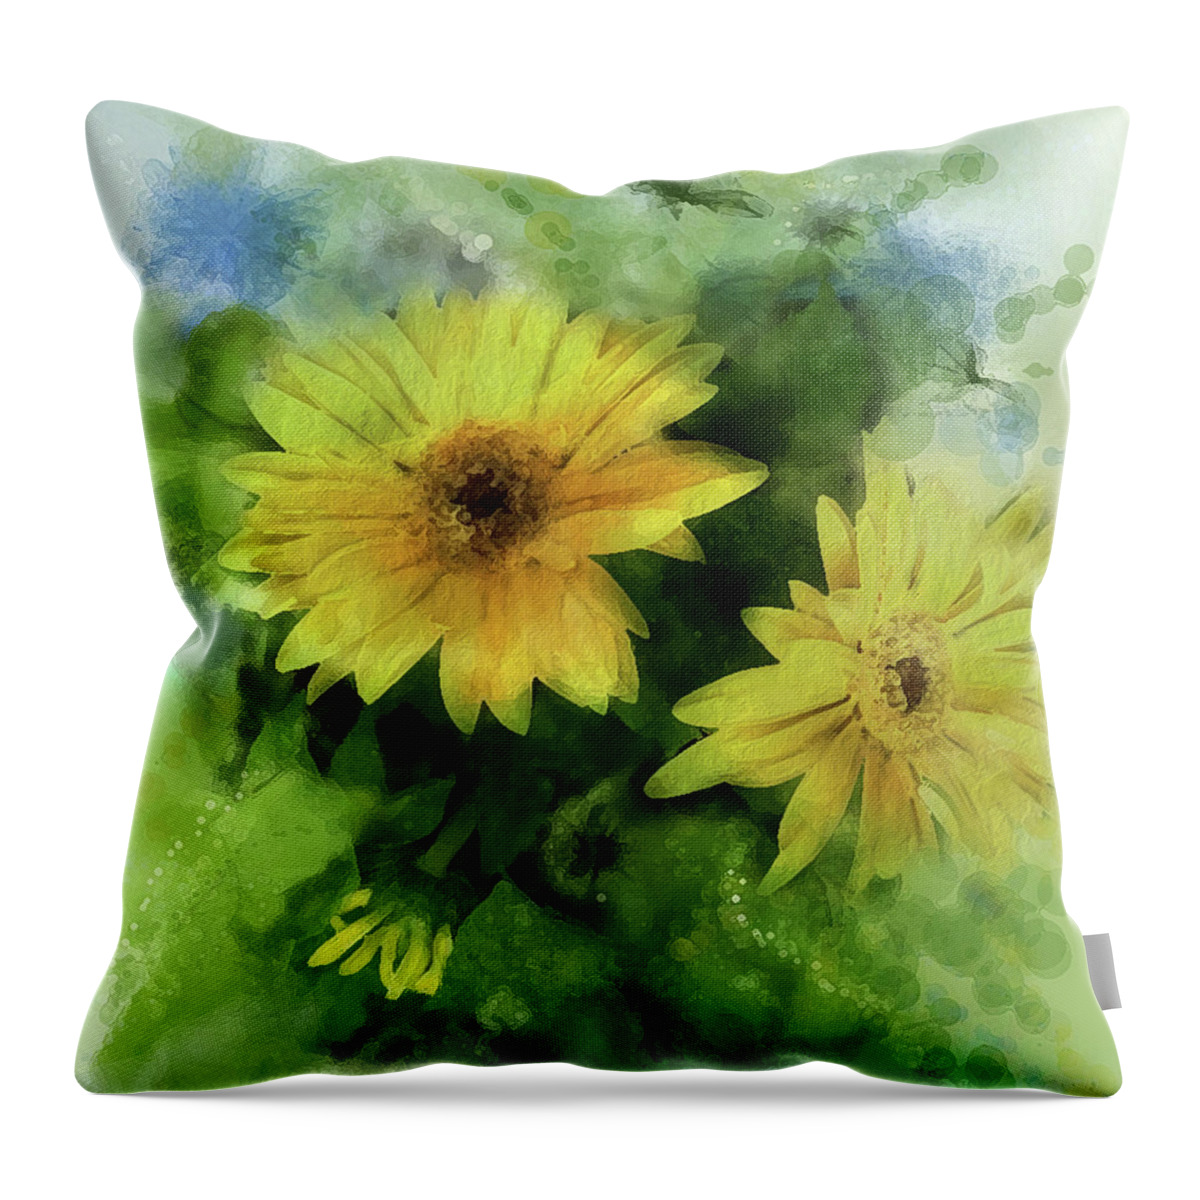 Daisies Throw Pillow featuring the digital art Crown Jewels by Gina Harrison